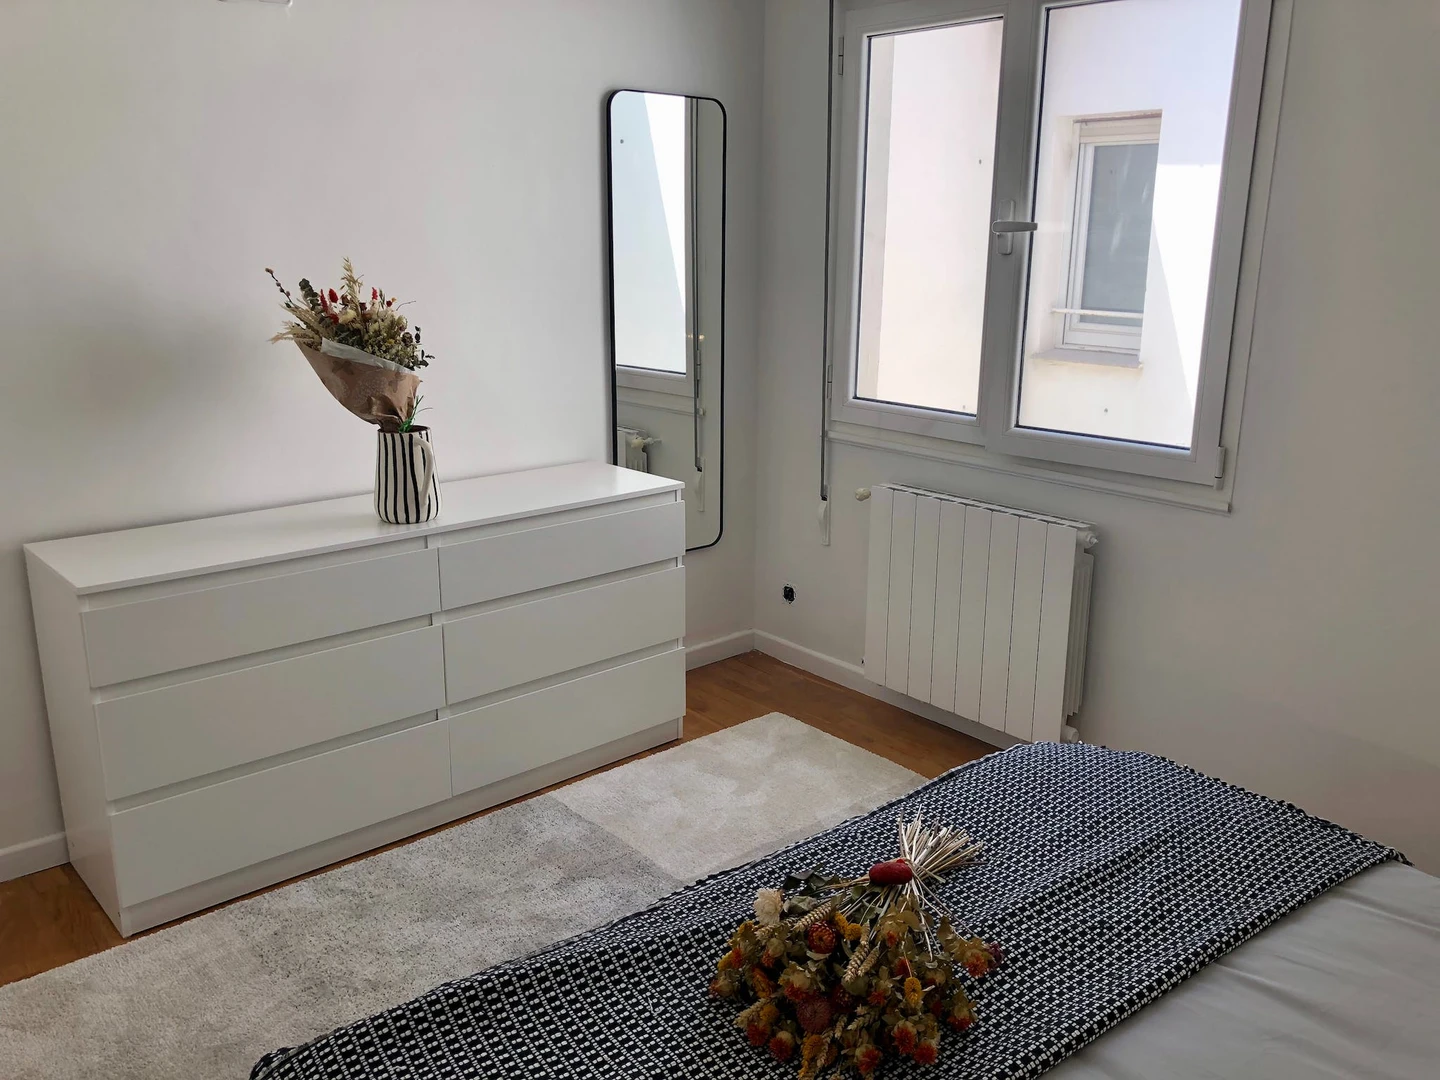 Two bedroom accommodation in Gijón